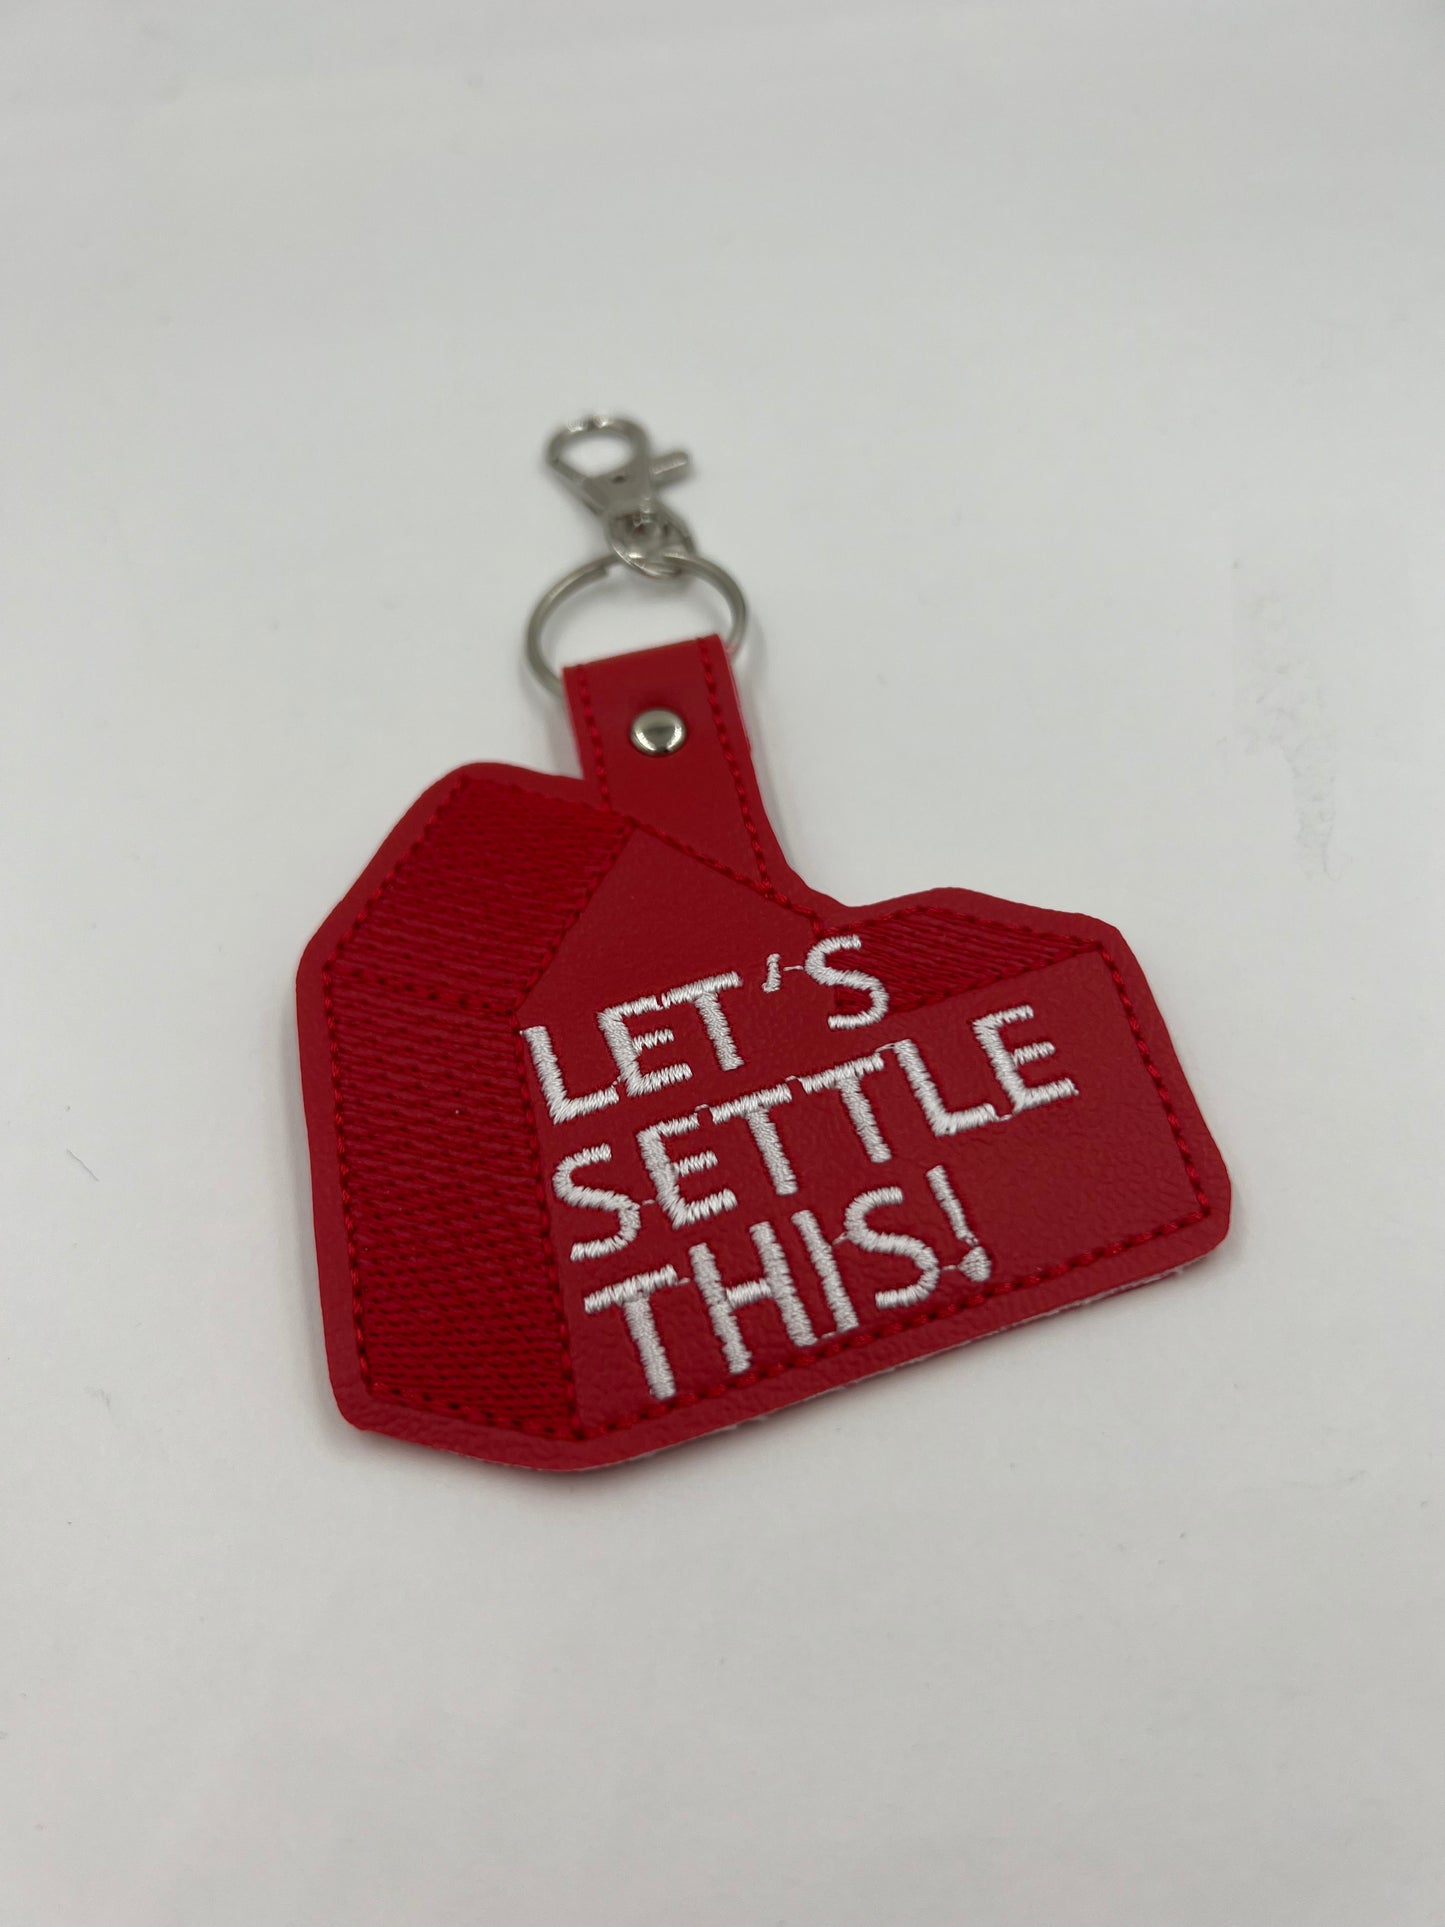 Let’s Settle This Keychain